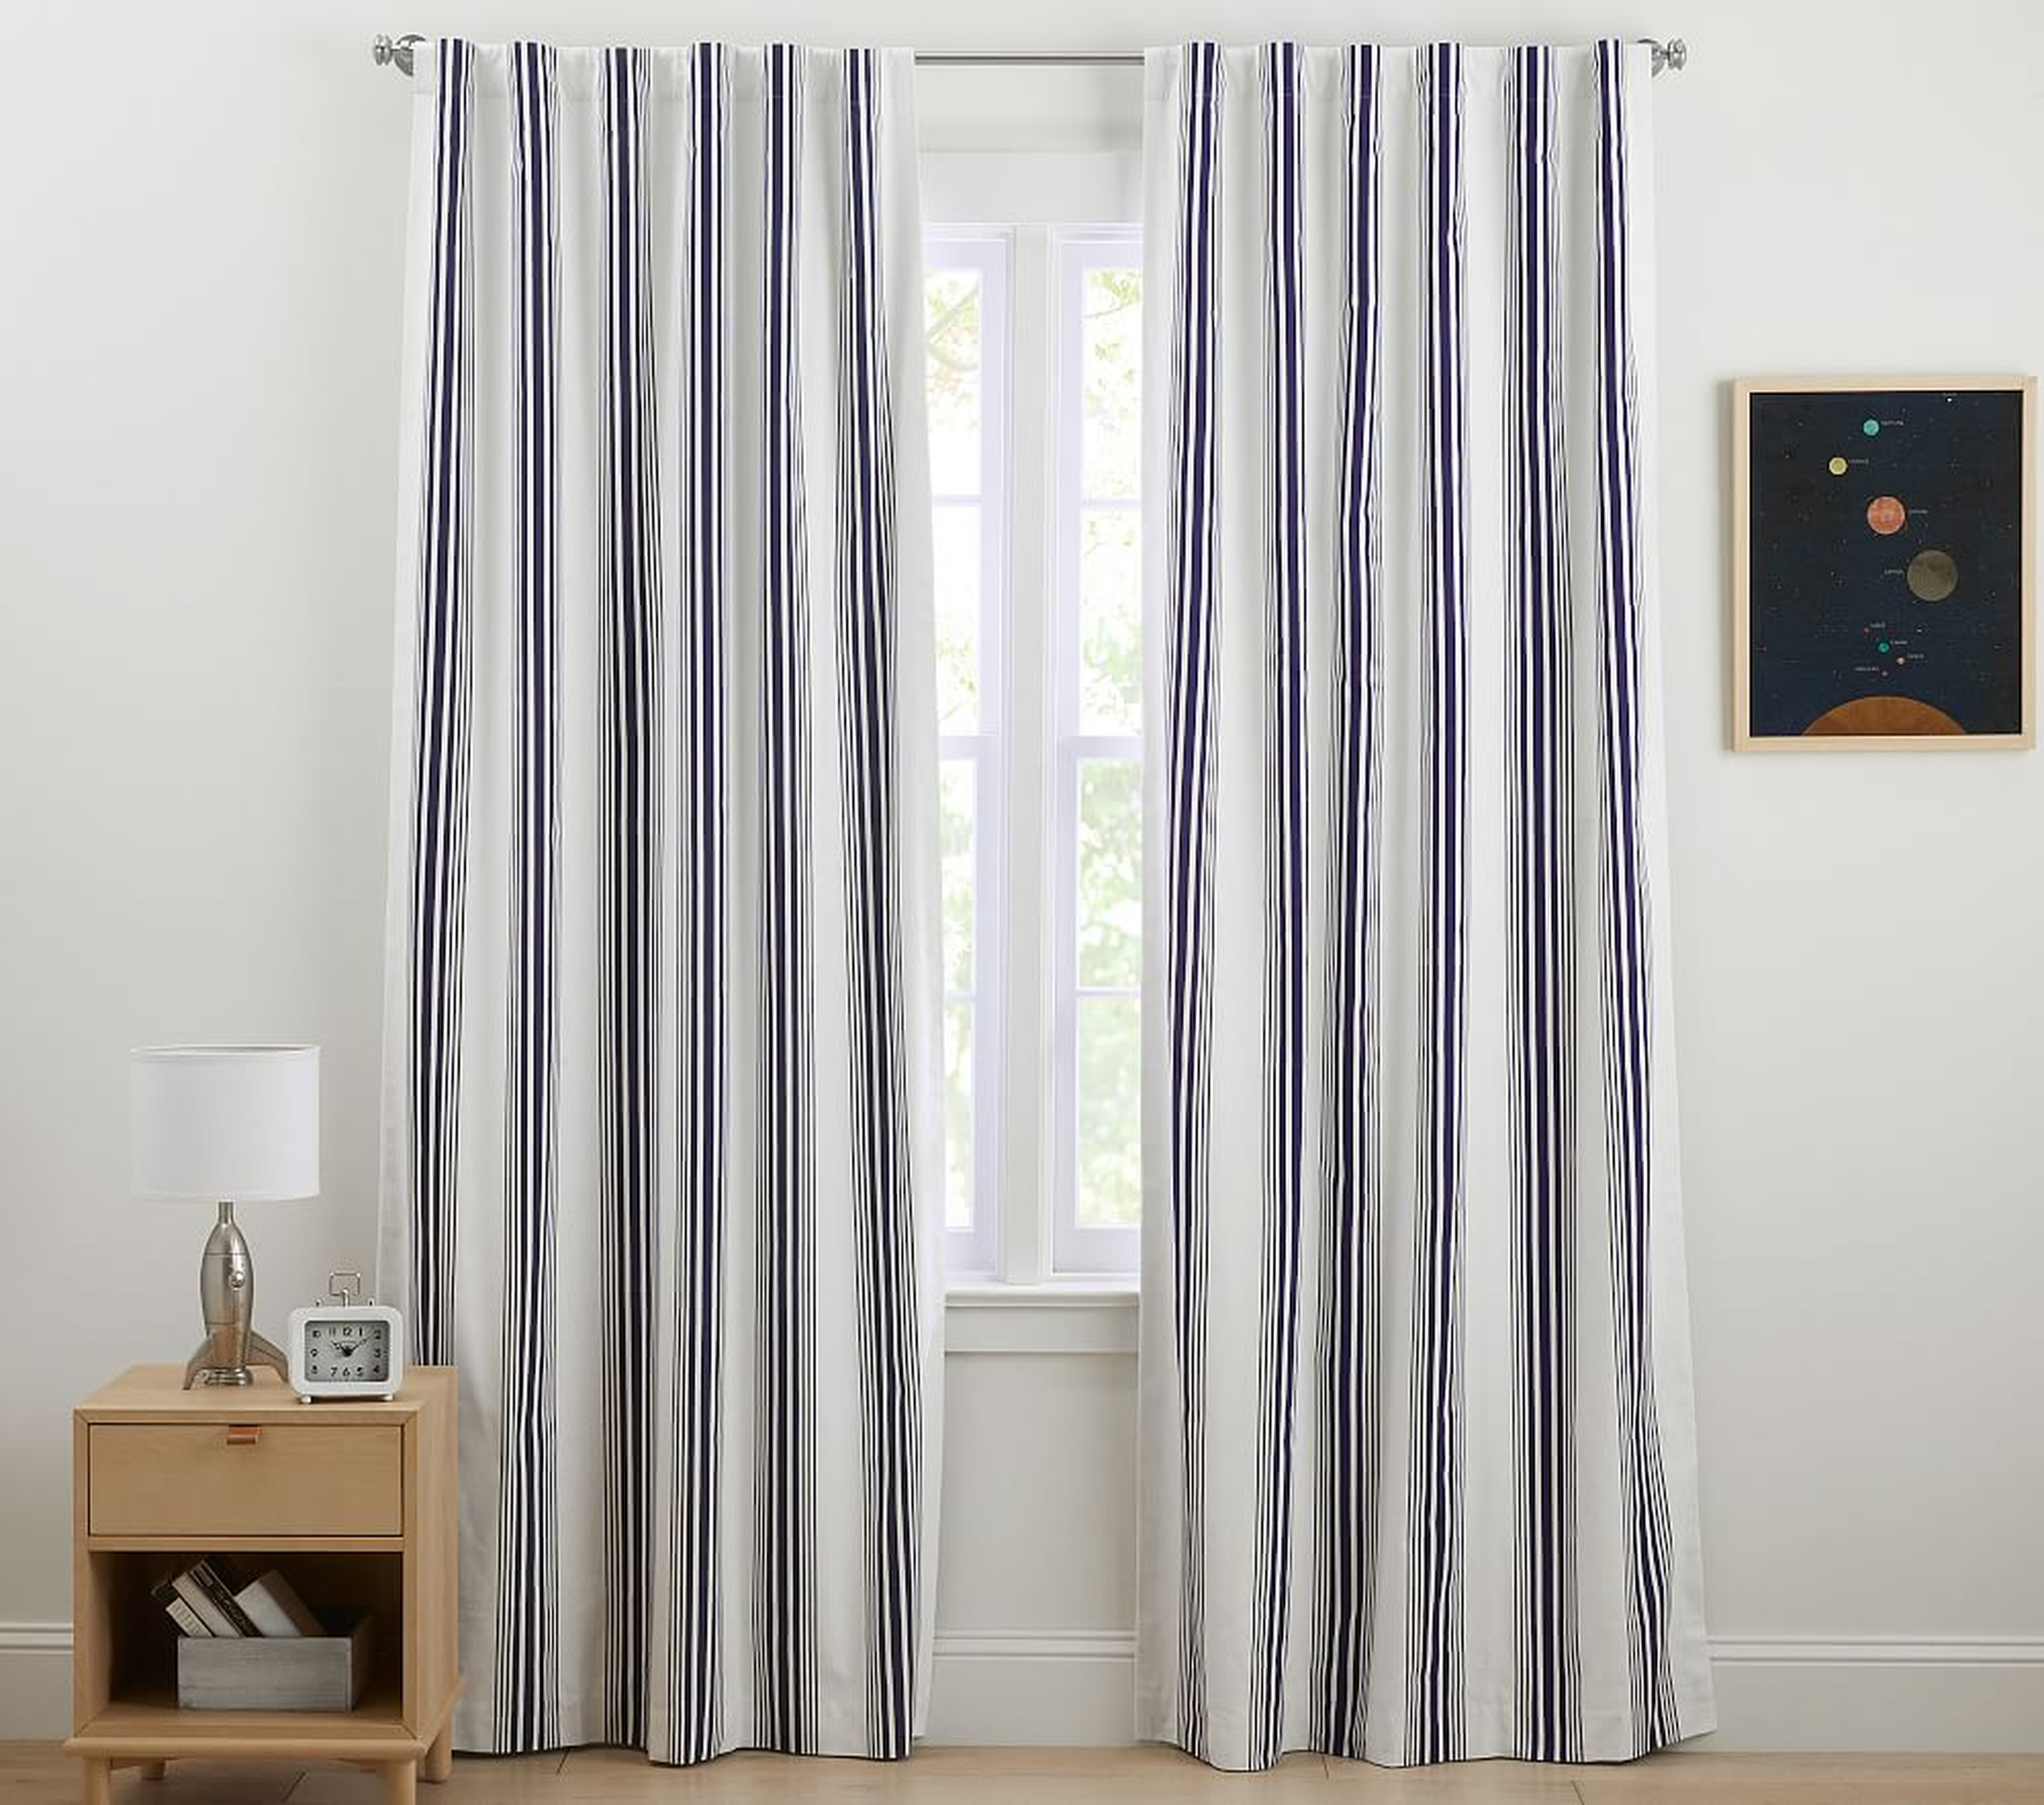 Ian Classic Stripe Blackout Curtain, 84 Inches, Navy, Set of 2 - Pottery Barn Kids